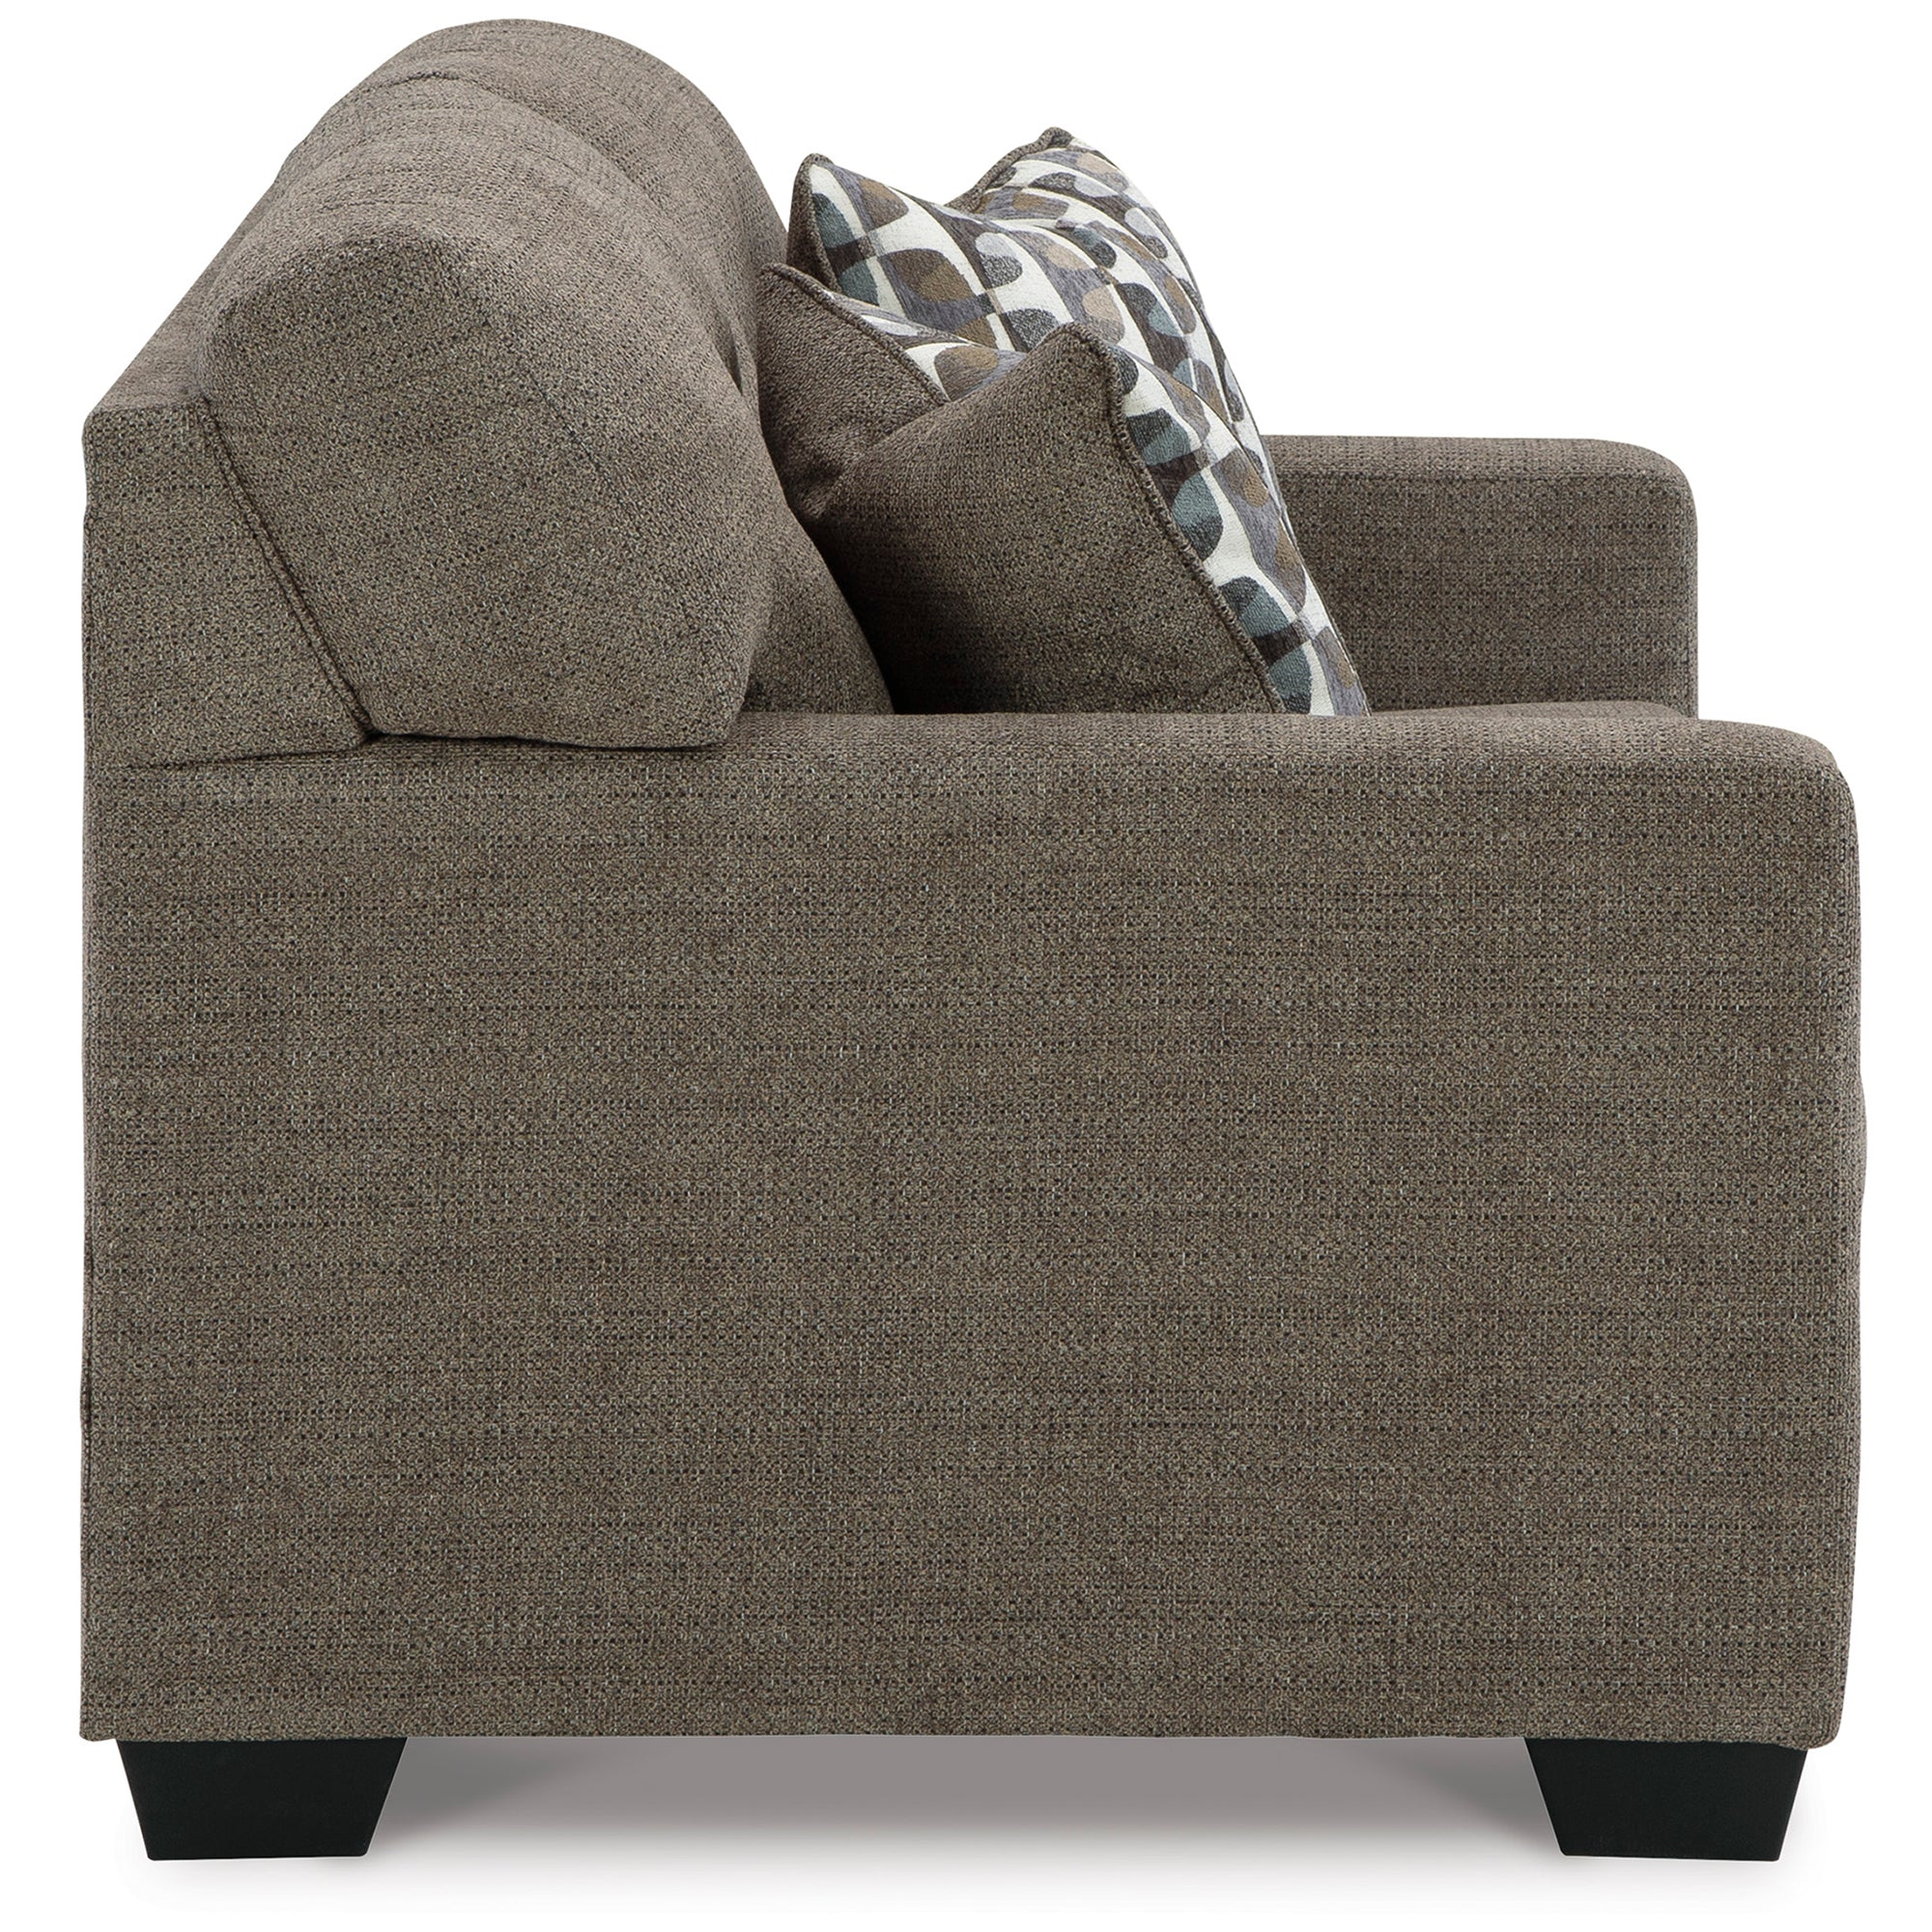 Sophisticated Mahoney Loveseat in chocolate, designed for both comfort and aesthetic appeal